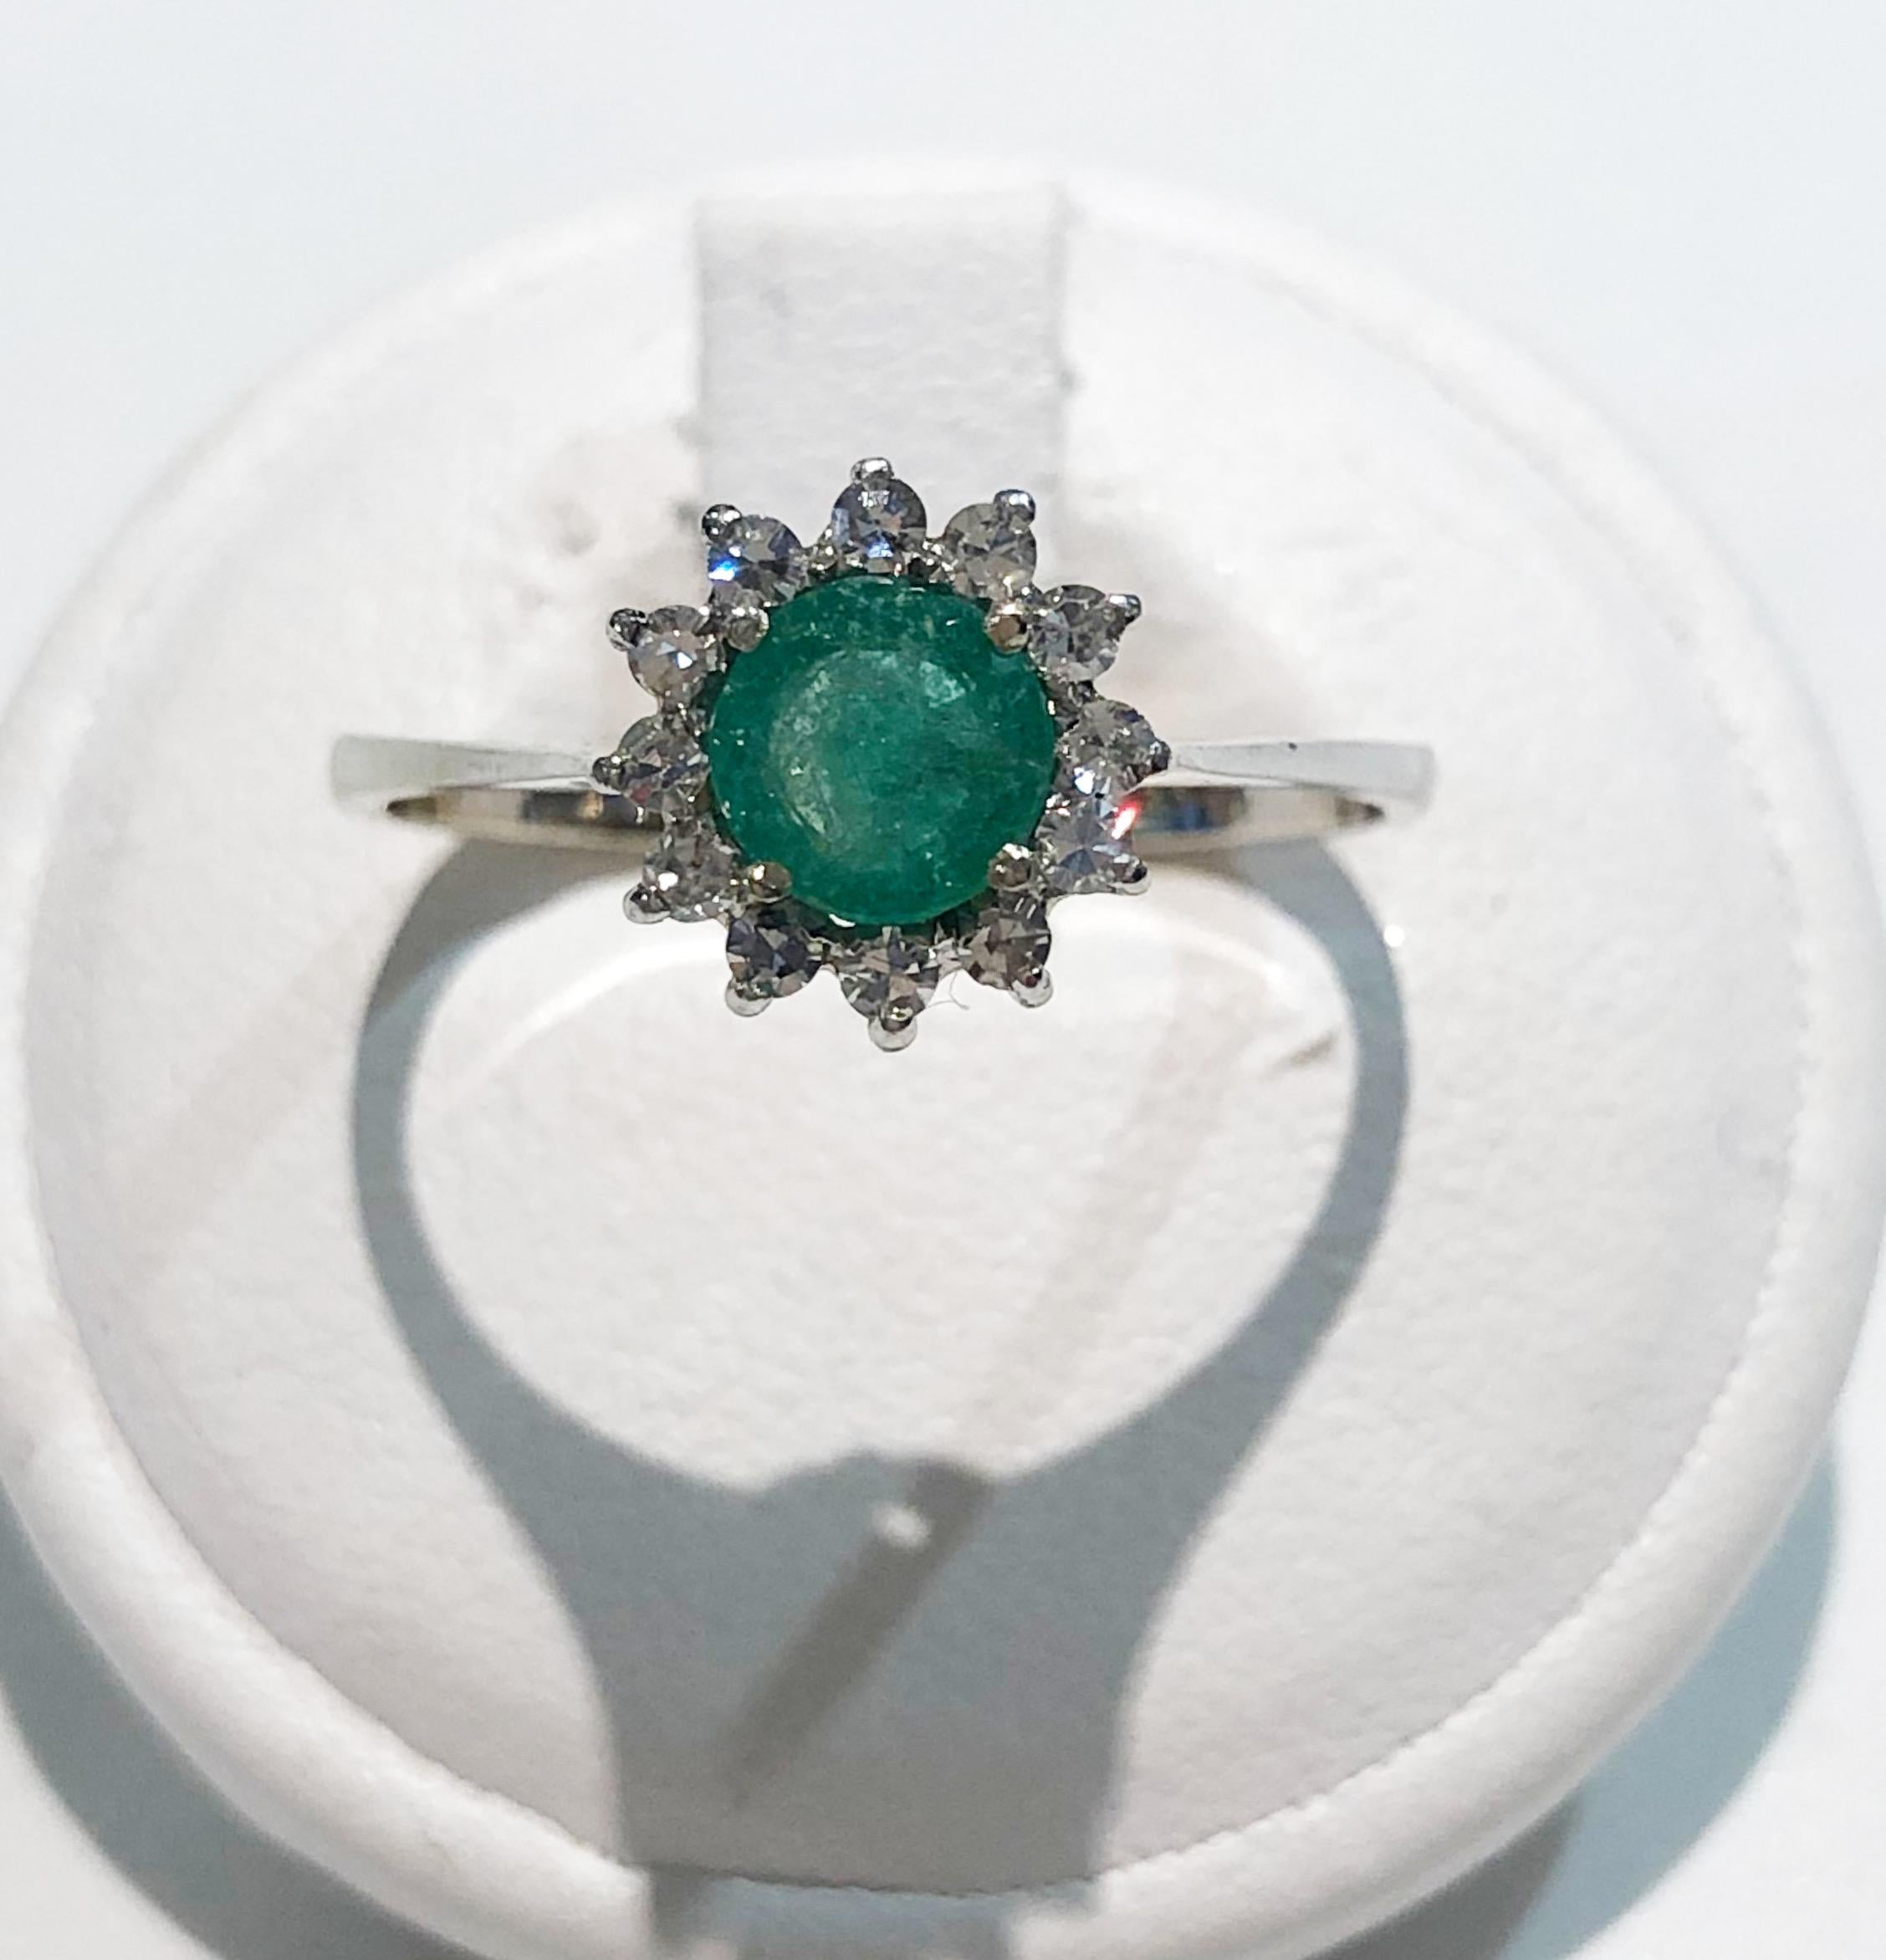 Vintage ring with 18 karat white gold band, emerald and brilliant diamonds, Italy 1960s
Ring size US 7